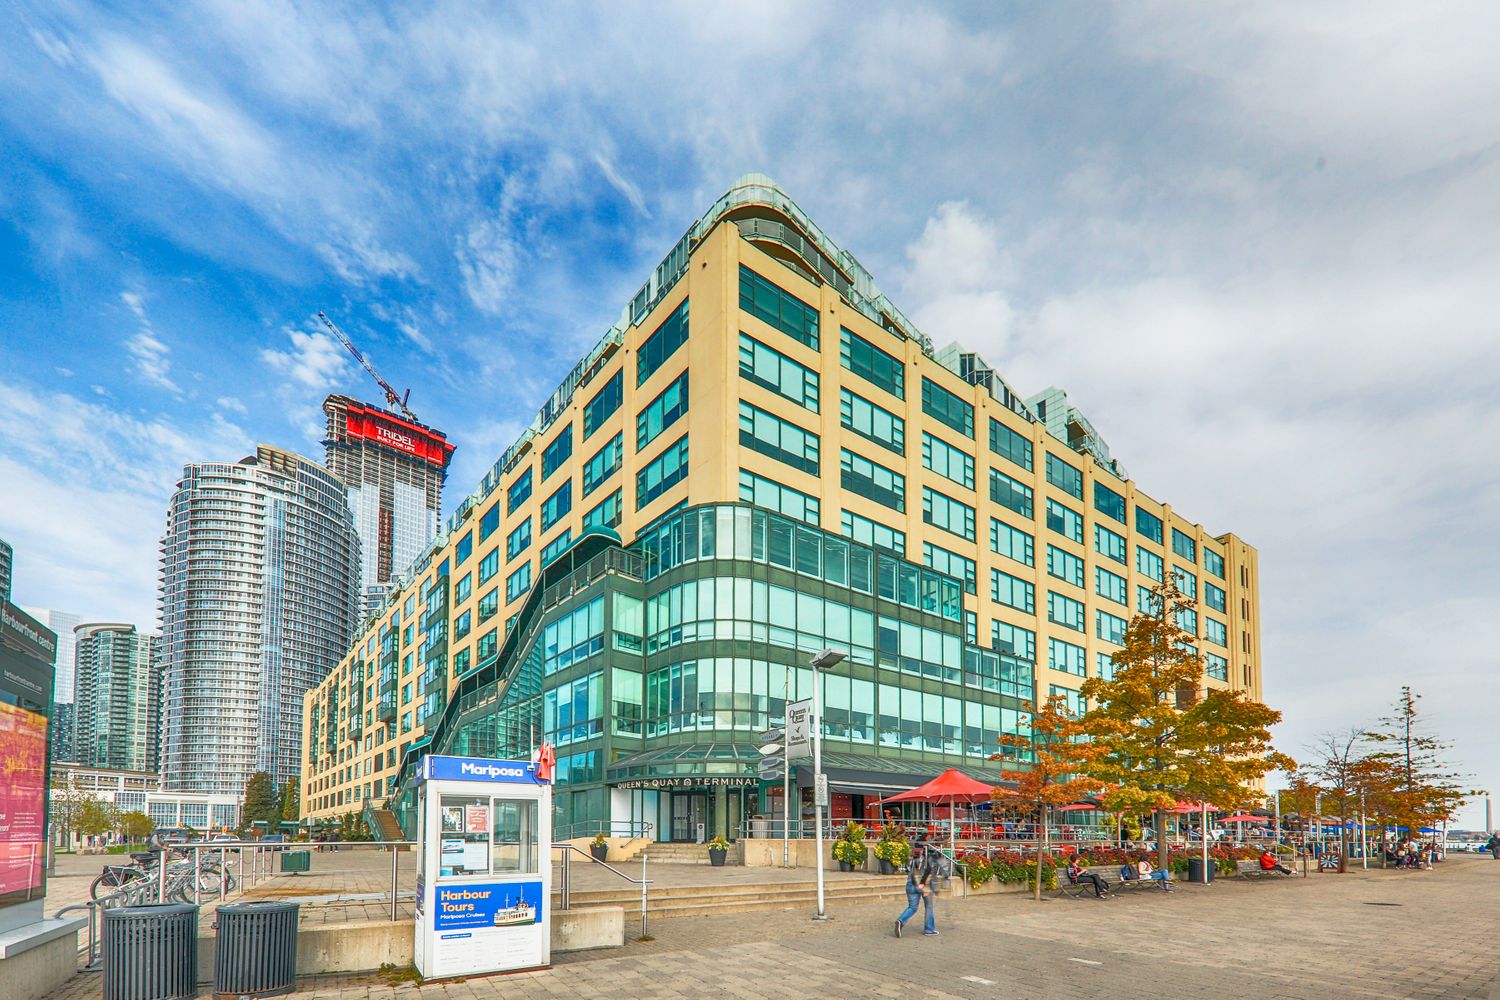 211 Queens Quay W. Queens Quay Terminal is located in  Downtown, Toronto - image #2 of 4